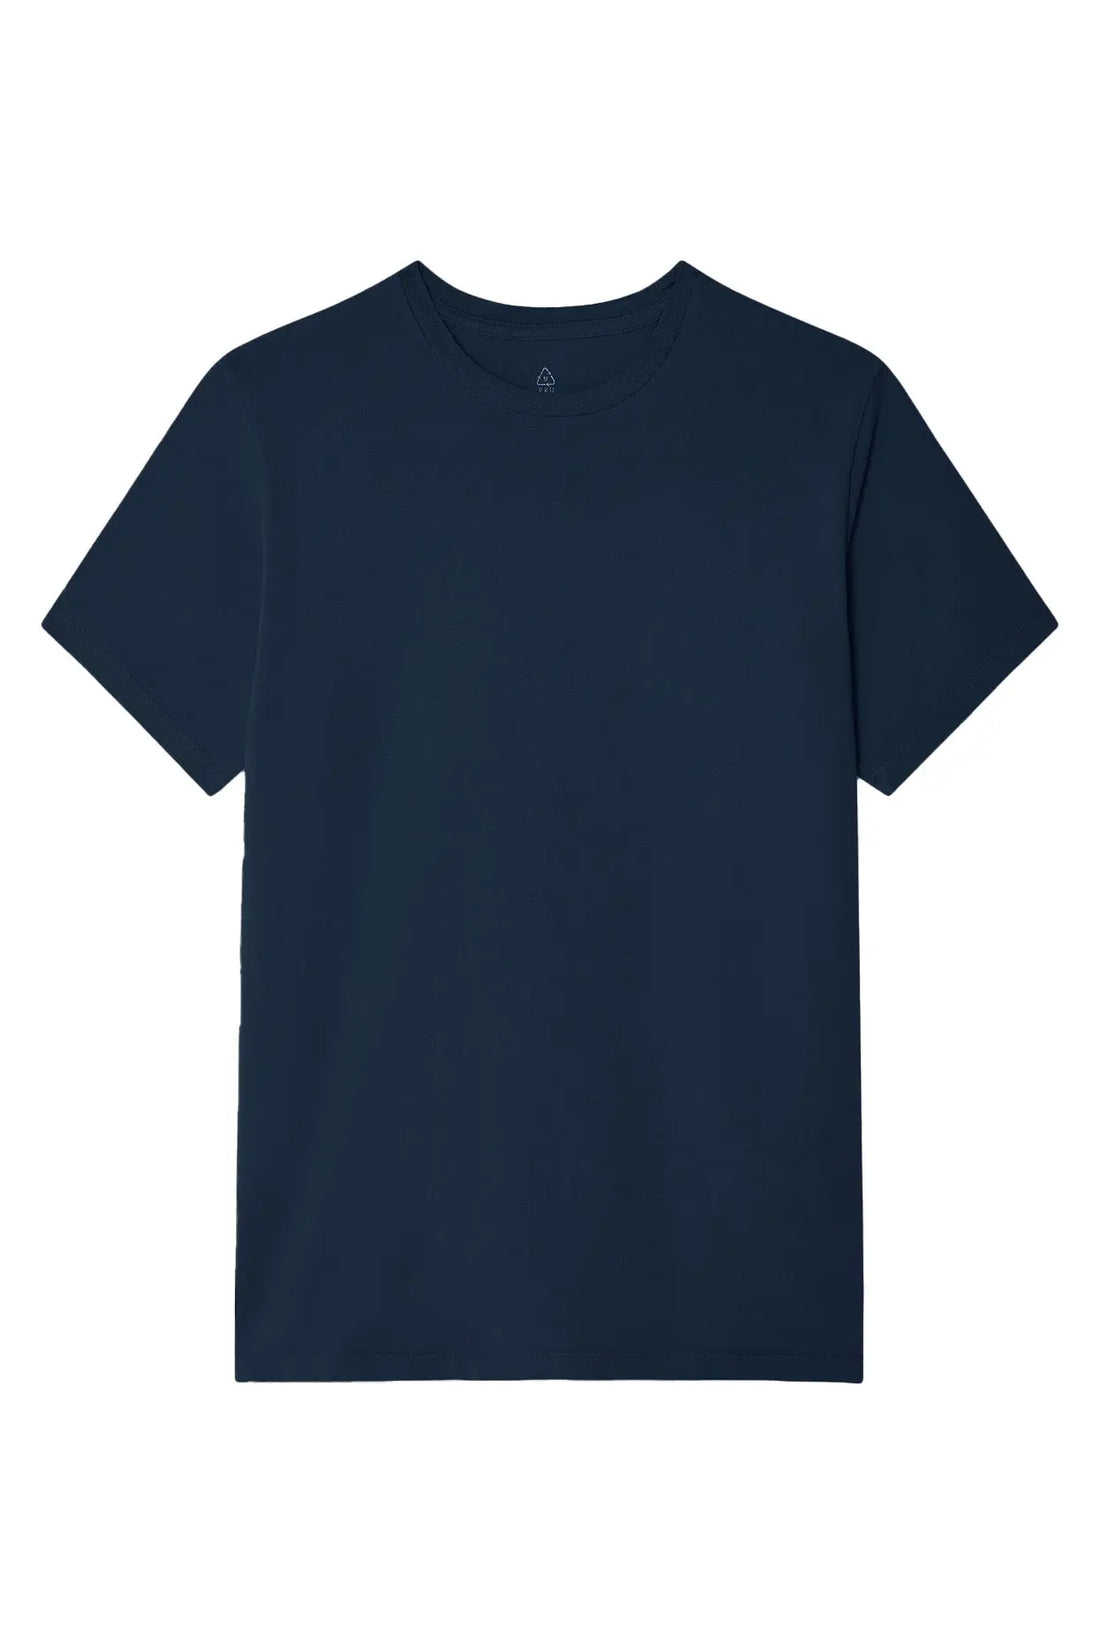 Recycled Cotton Crew Tee- Navy - Eames NW